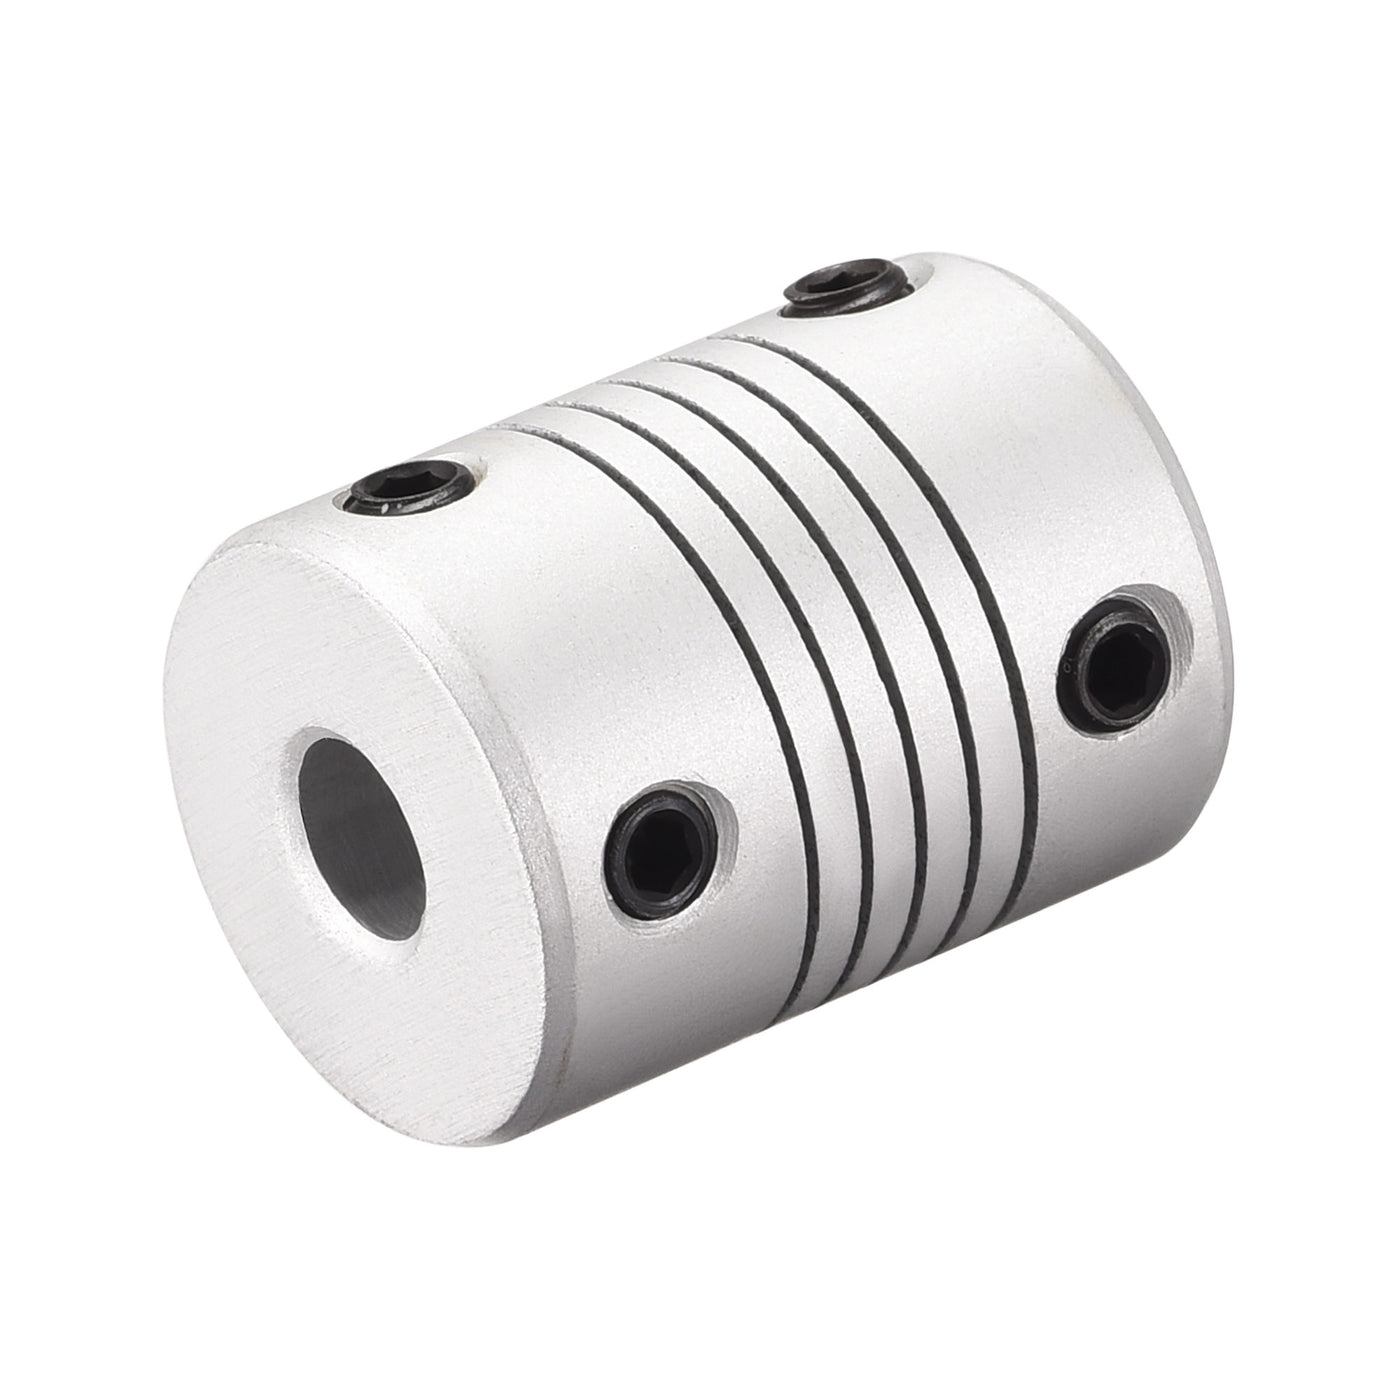 uxcell Uxcell 6mm to 9mm Aluminum Alloy Shaft Coupling Flexible Coupler L25xD19 Silver